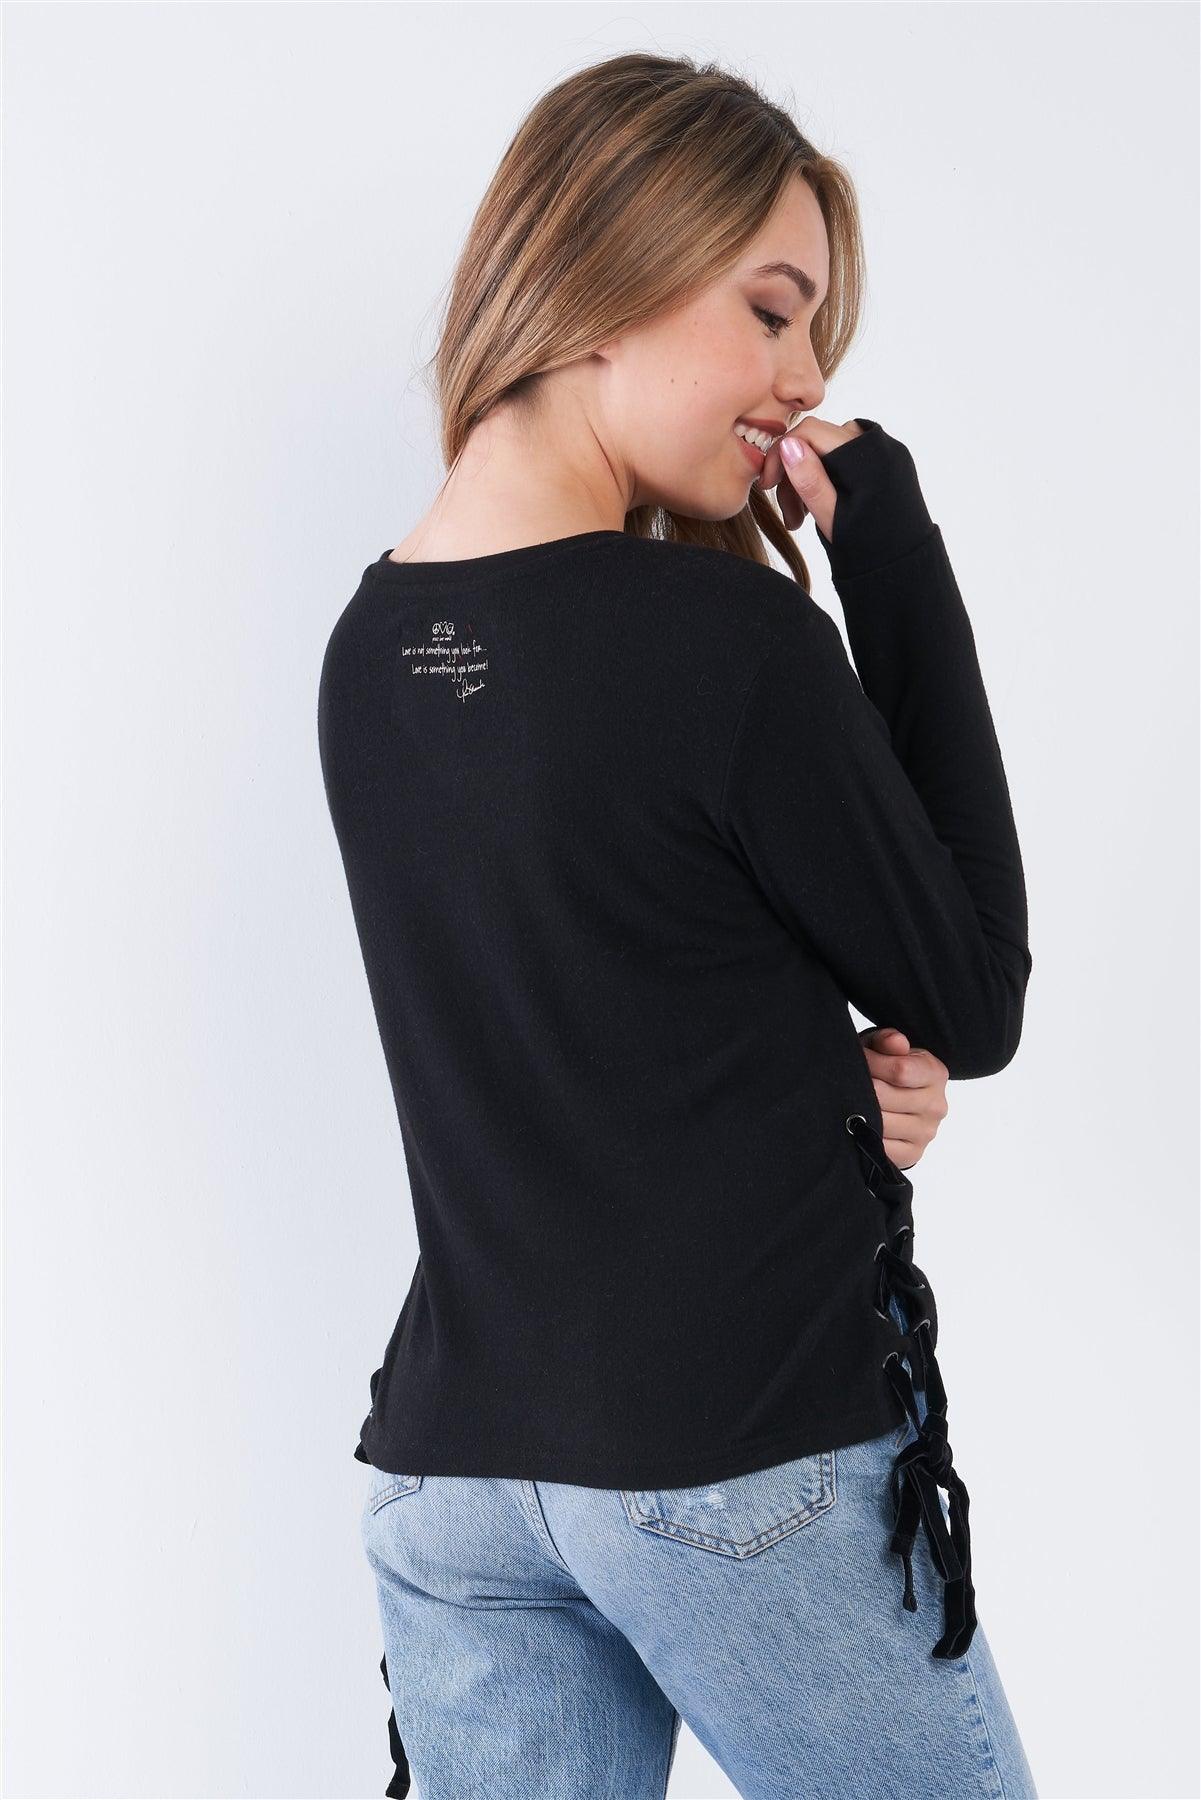 Black Long Sleeve "Crazy In Love" Graphic Crew Neck Side Lace Up Top